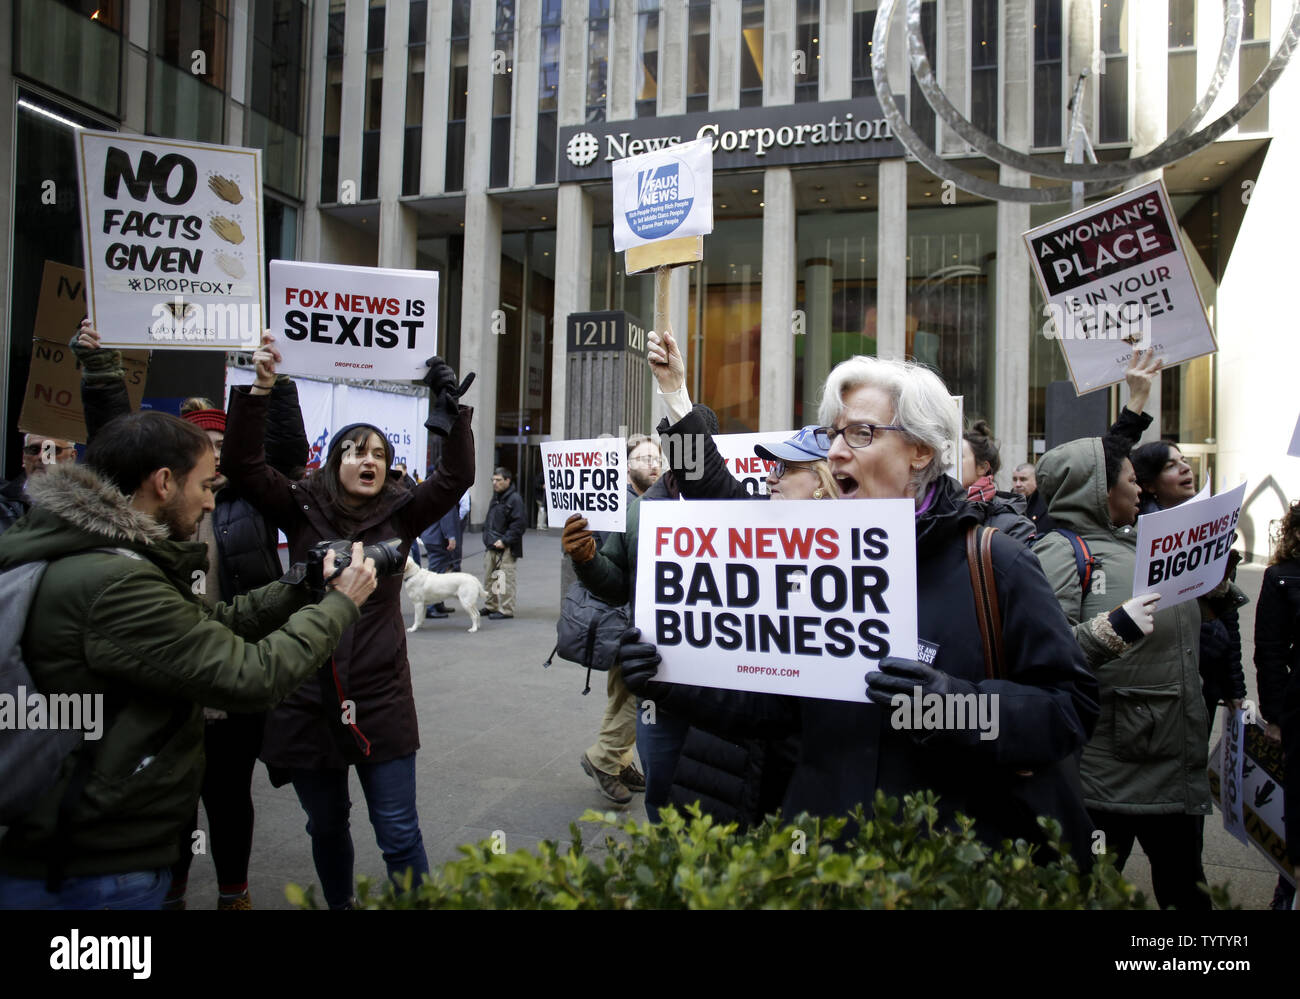 Protesters hold up signs at a rally against Fox News outside the Fox News headquarters at the News Corporation building on March 13, 2019 in New York City. The protests are taking place just as Fox News welcomes its top advertisers for a major sales meeting.   Photo by John Angelillo/UPI Stock Photo